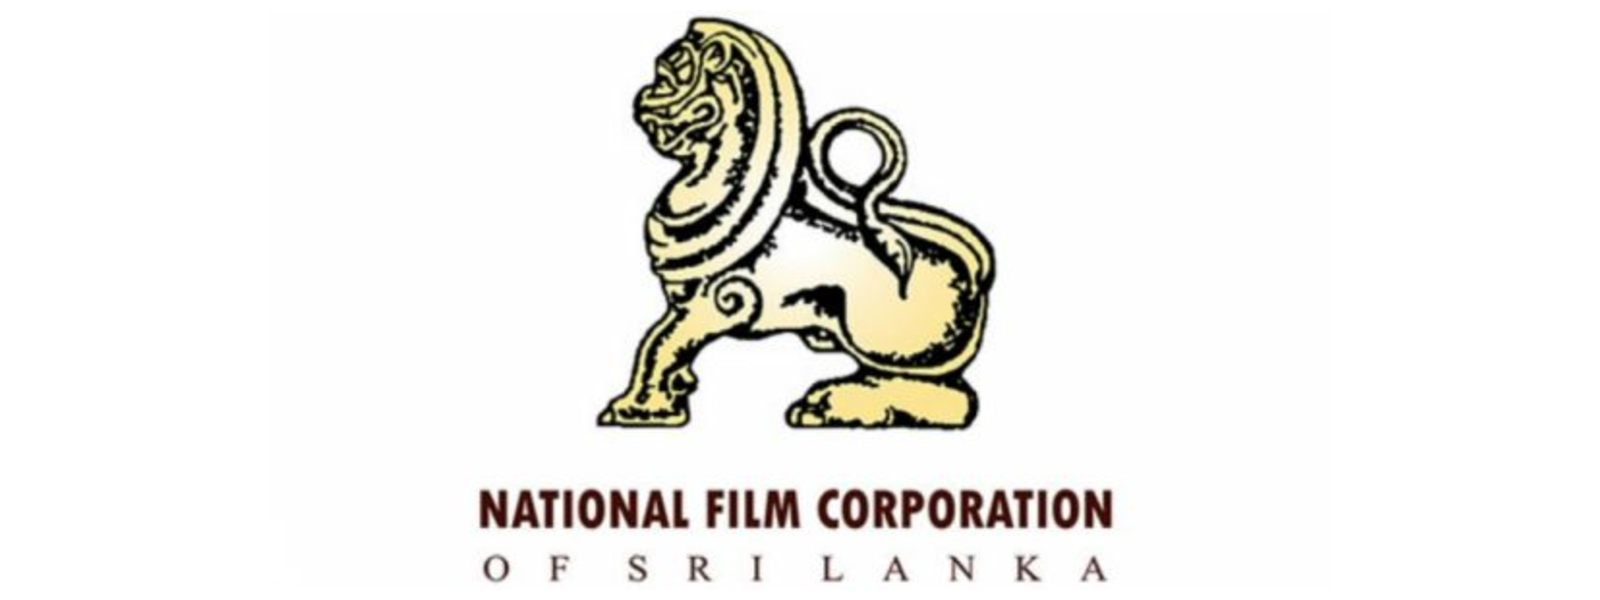 GRACE PERIOD FOR CINEMA THEATRES TO SETTLE BILLS